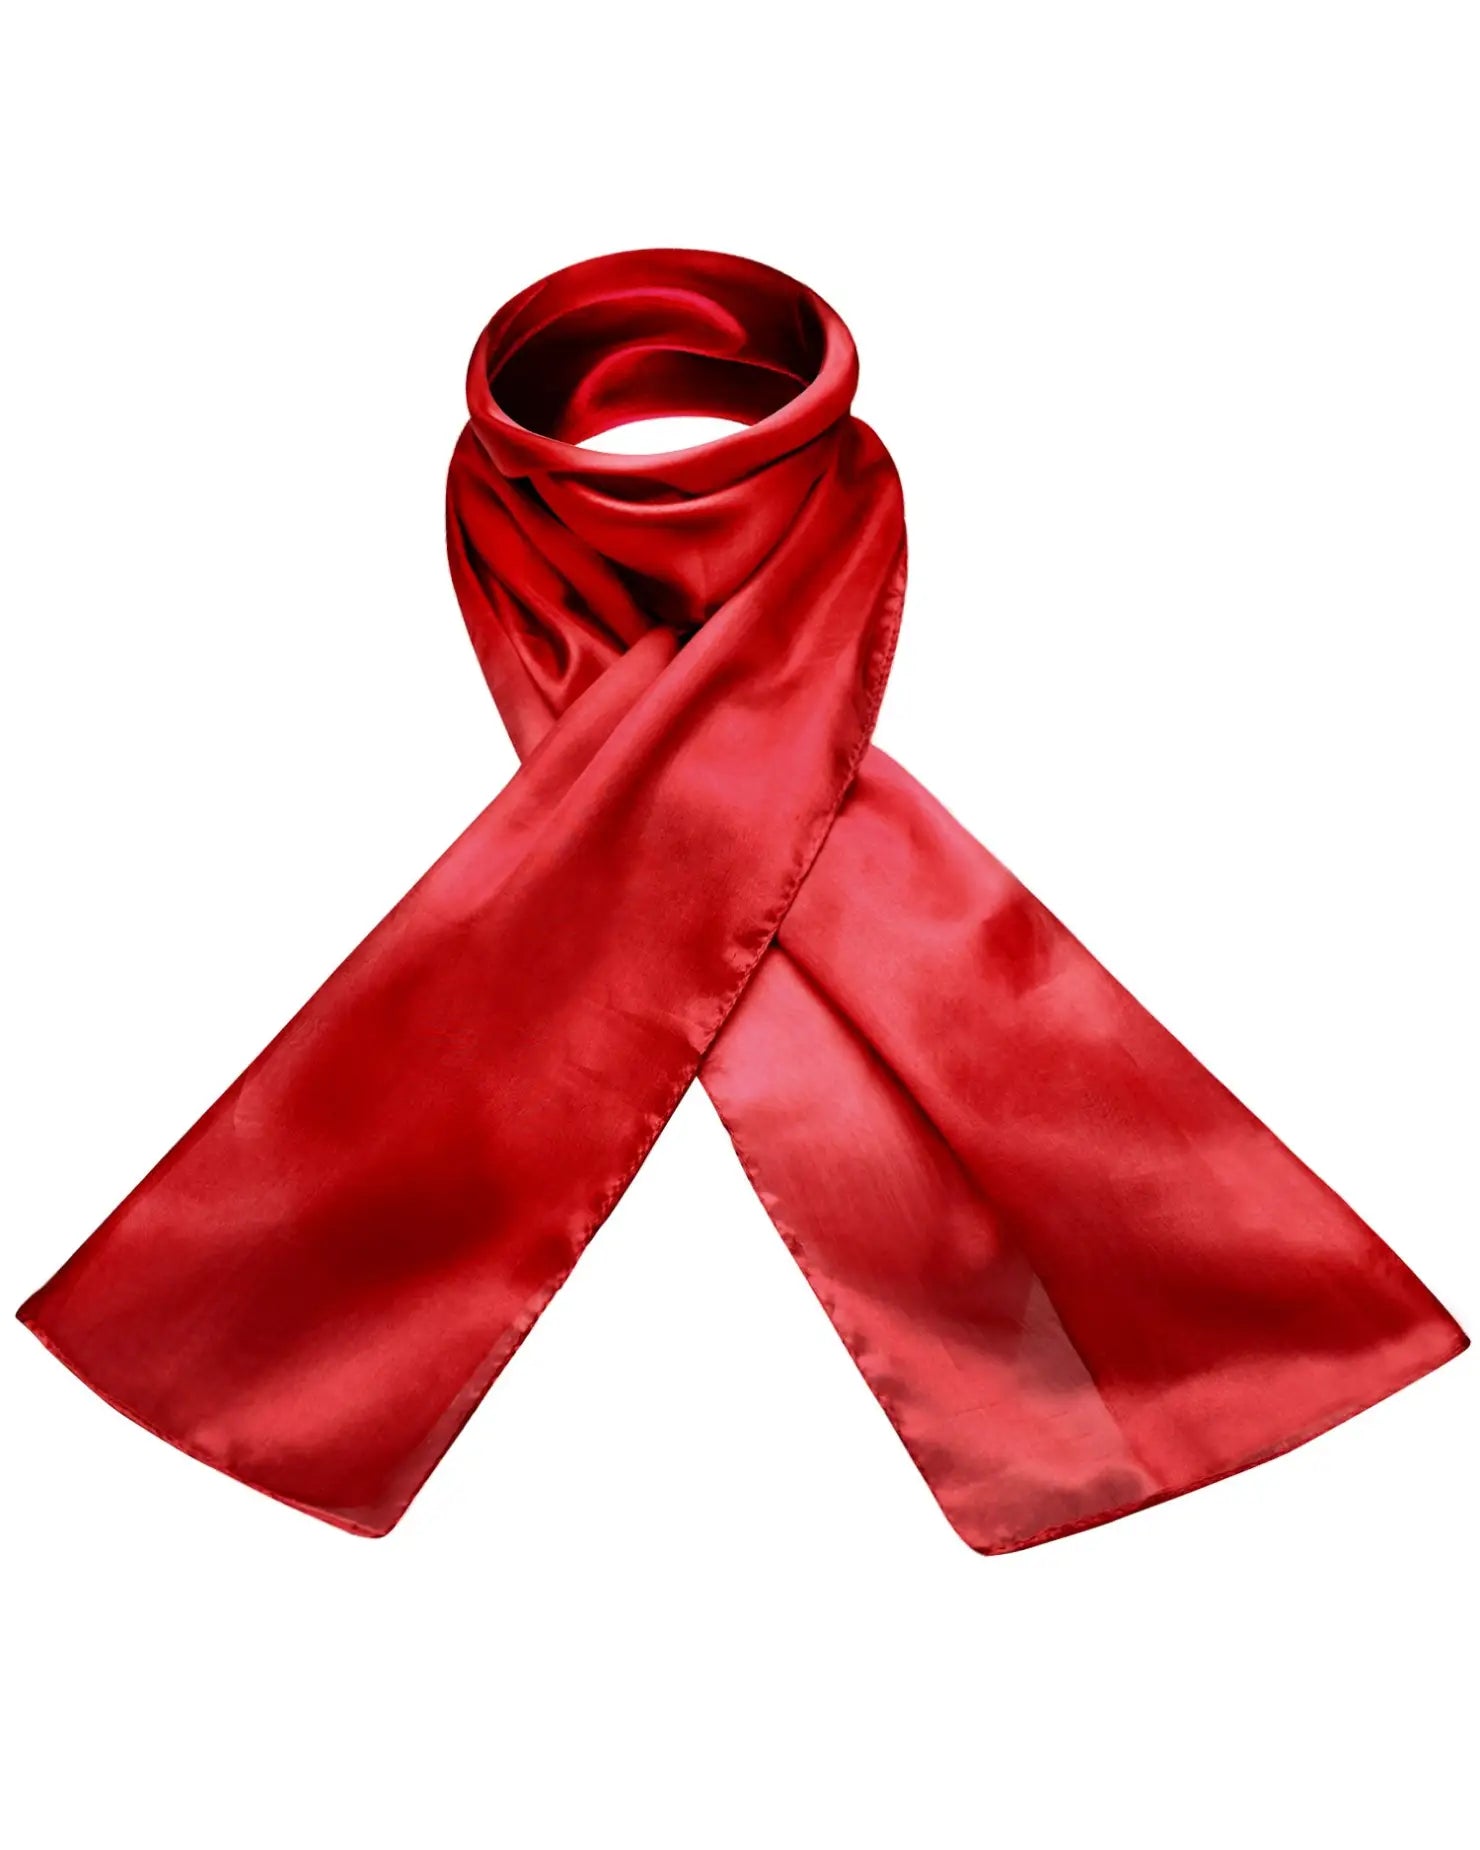 Red mulberry silk scarf on luxurious white background.